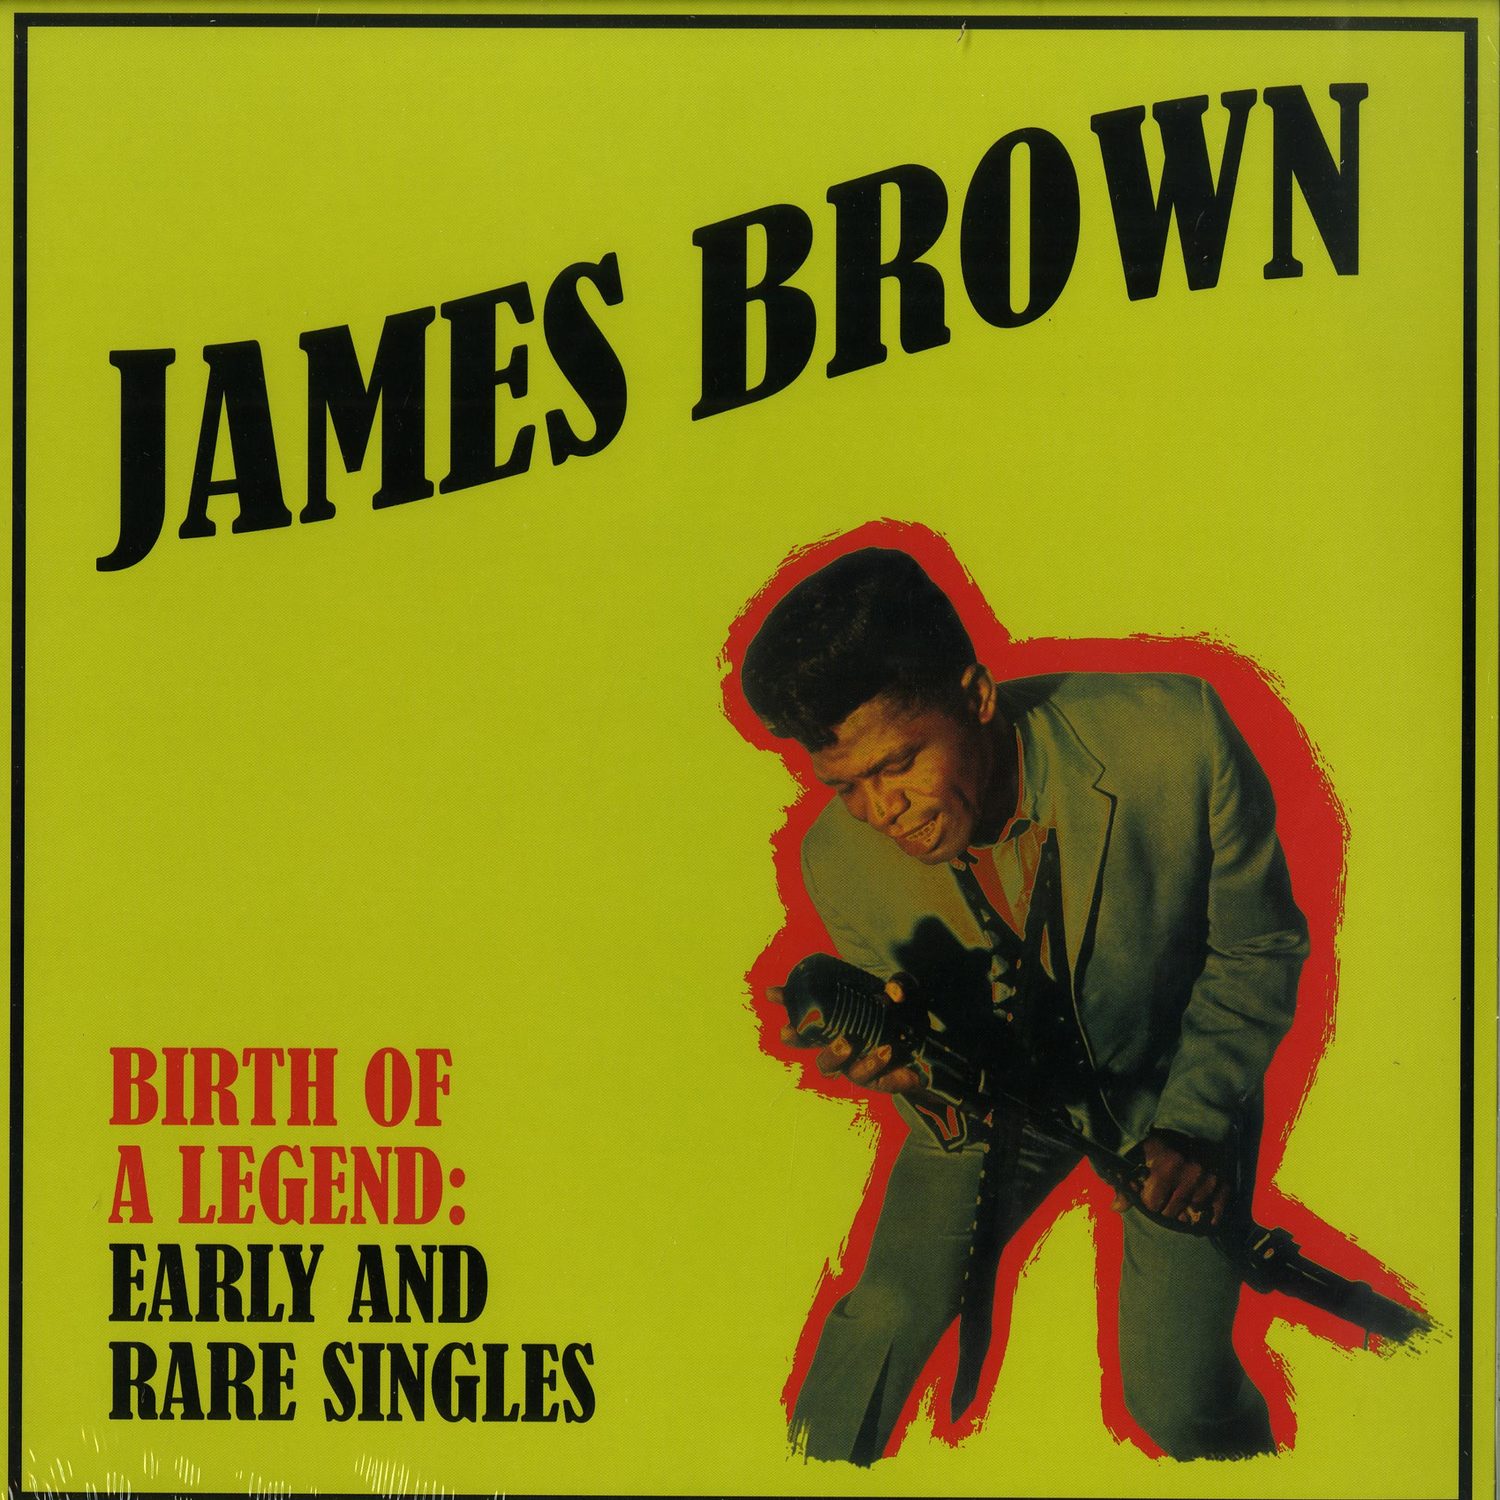 James Brown - BIRTH OF A LEGEND: EARLY AND RARE SINGLES 